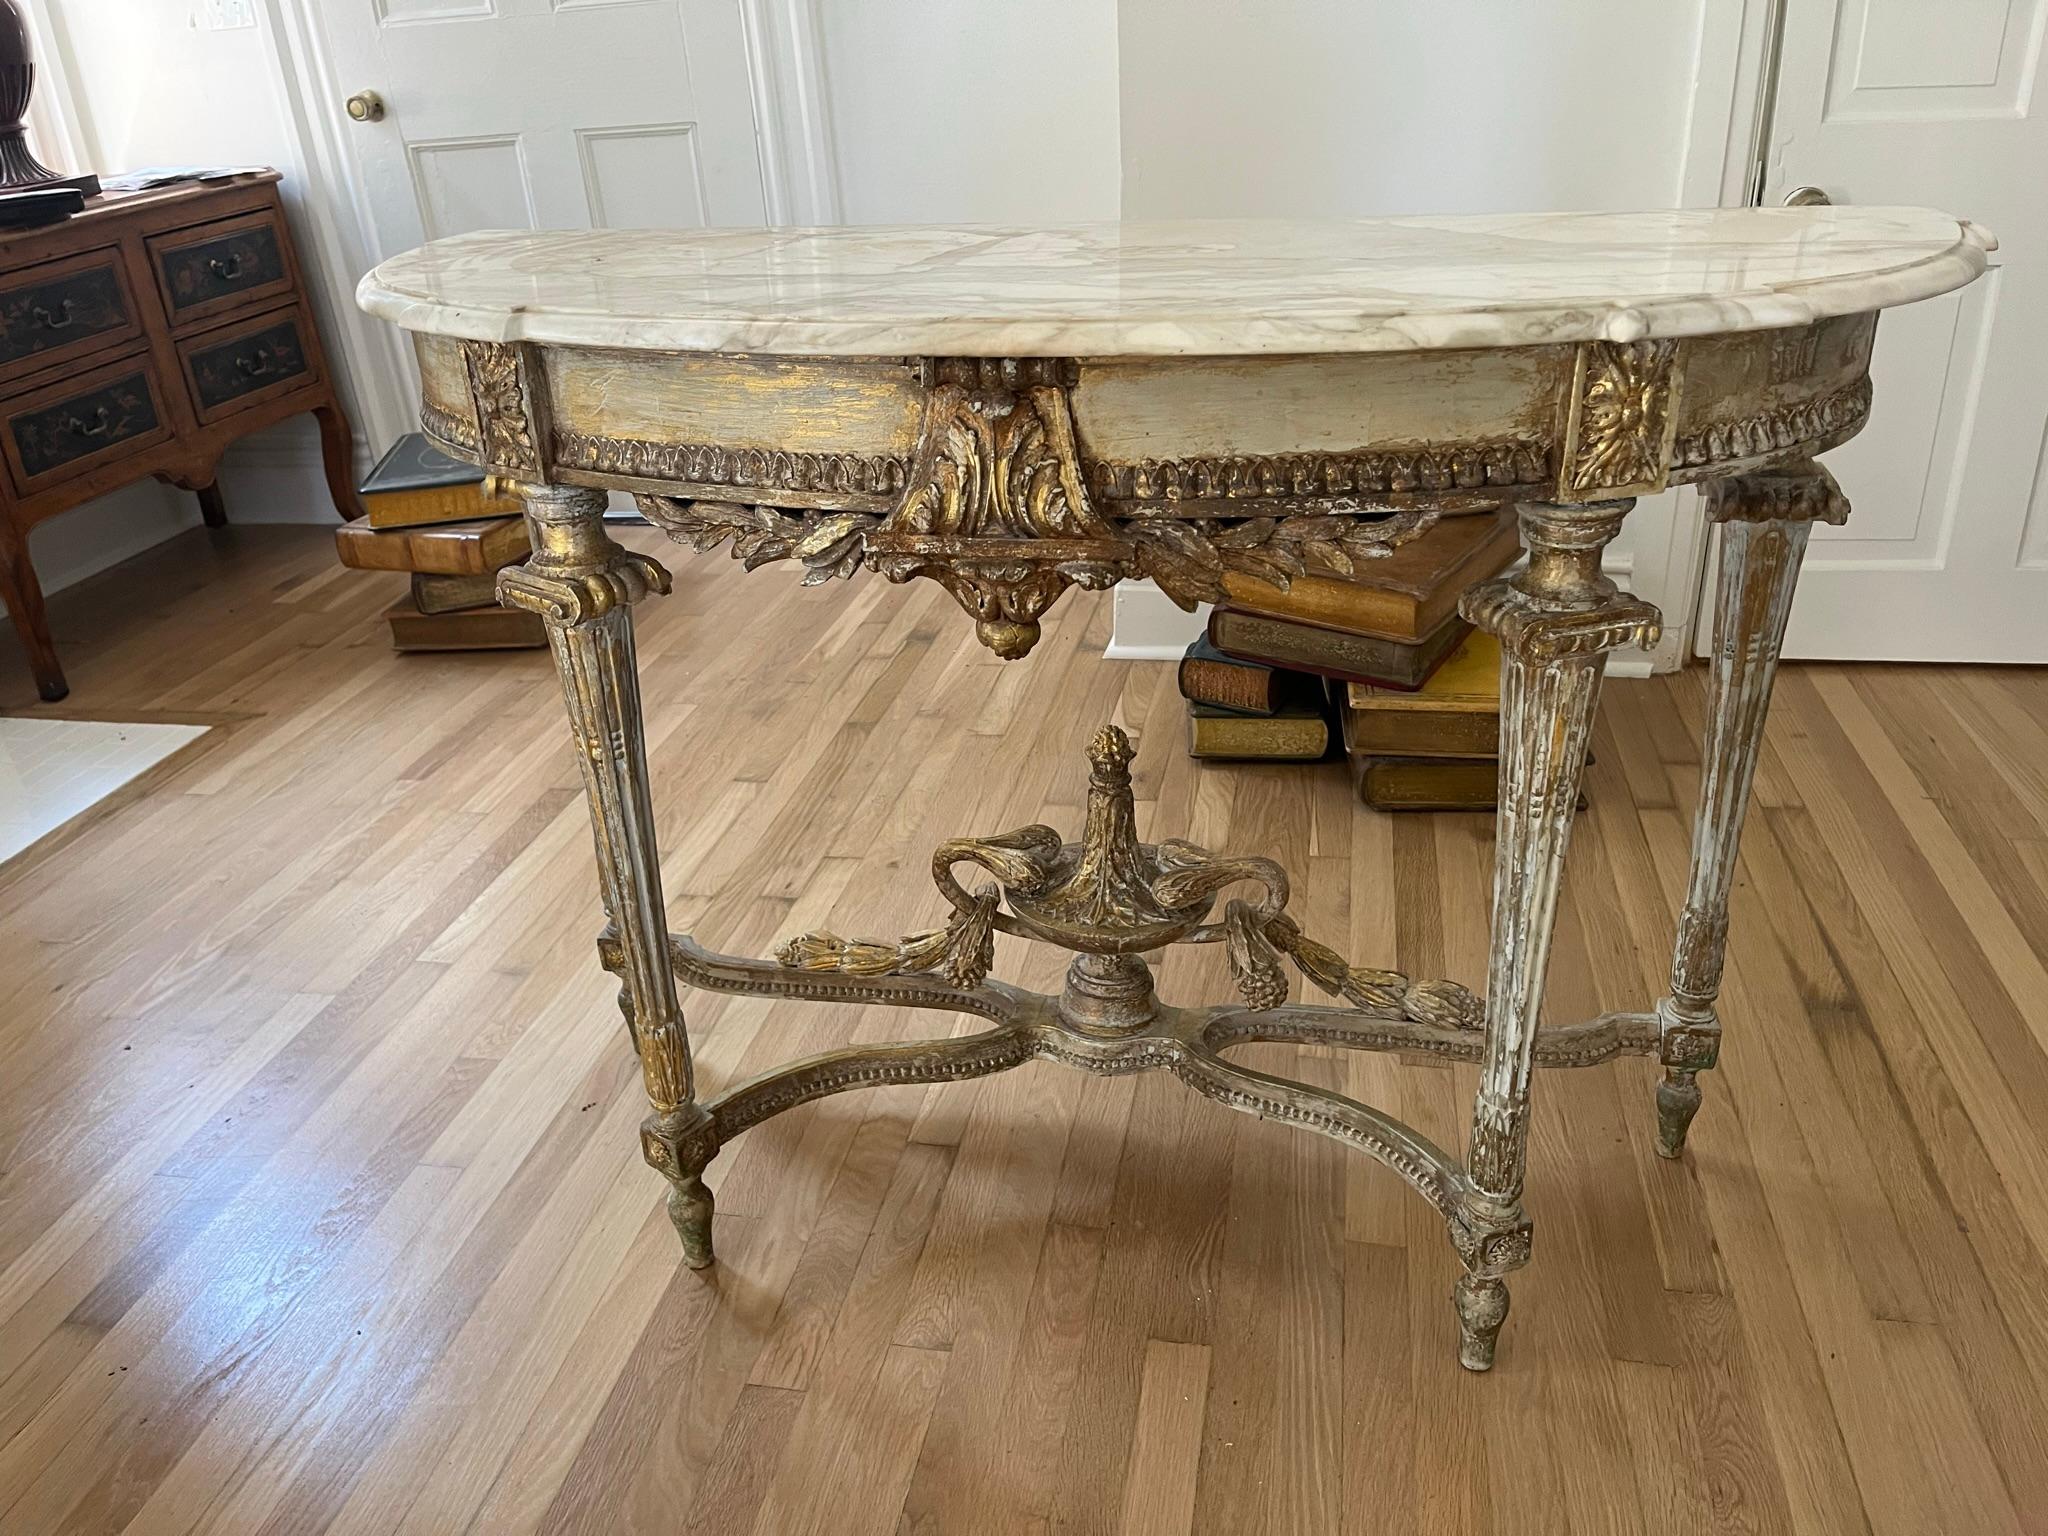 An unusual set of paint and giltwood distressed Louis Xvi style demilune shaped console tables with Gustavian type finish . Each table with a stretcher and central urn furthered  adorned with floral and foliage carved decorations in full relief .